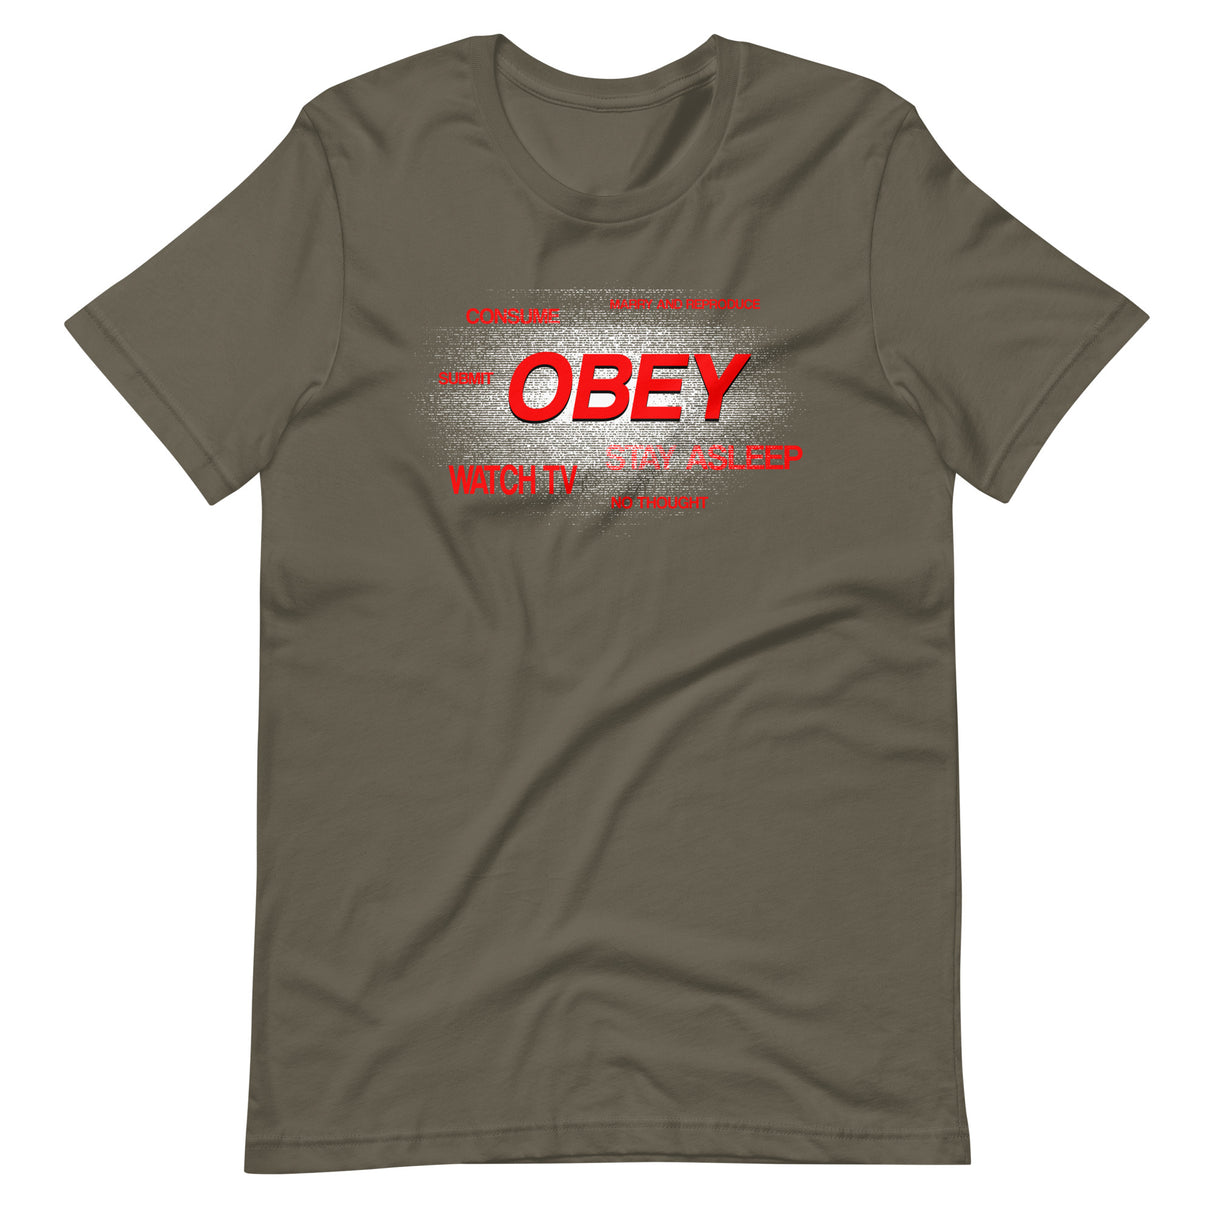 Obey Shirt - Libertarian Country